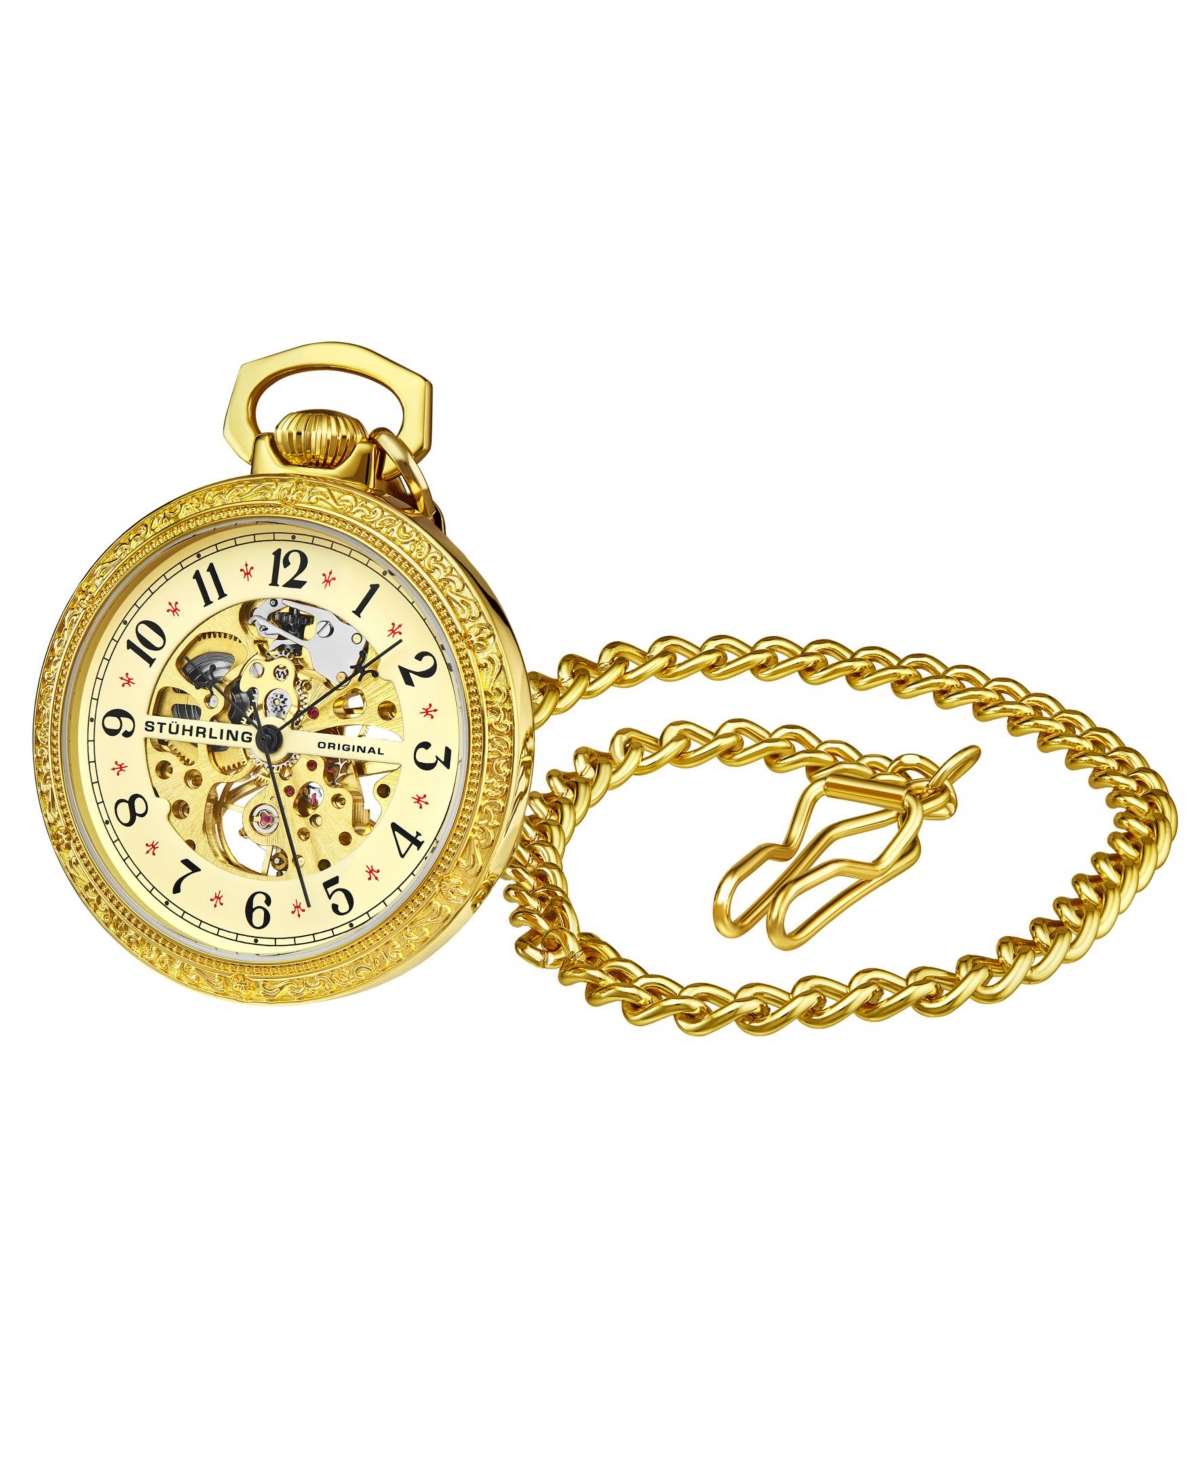 Women's Gold Tone Stainless Steel Chain Pocket Watch 48mm - Silver